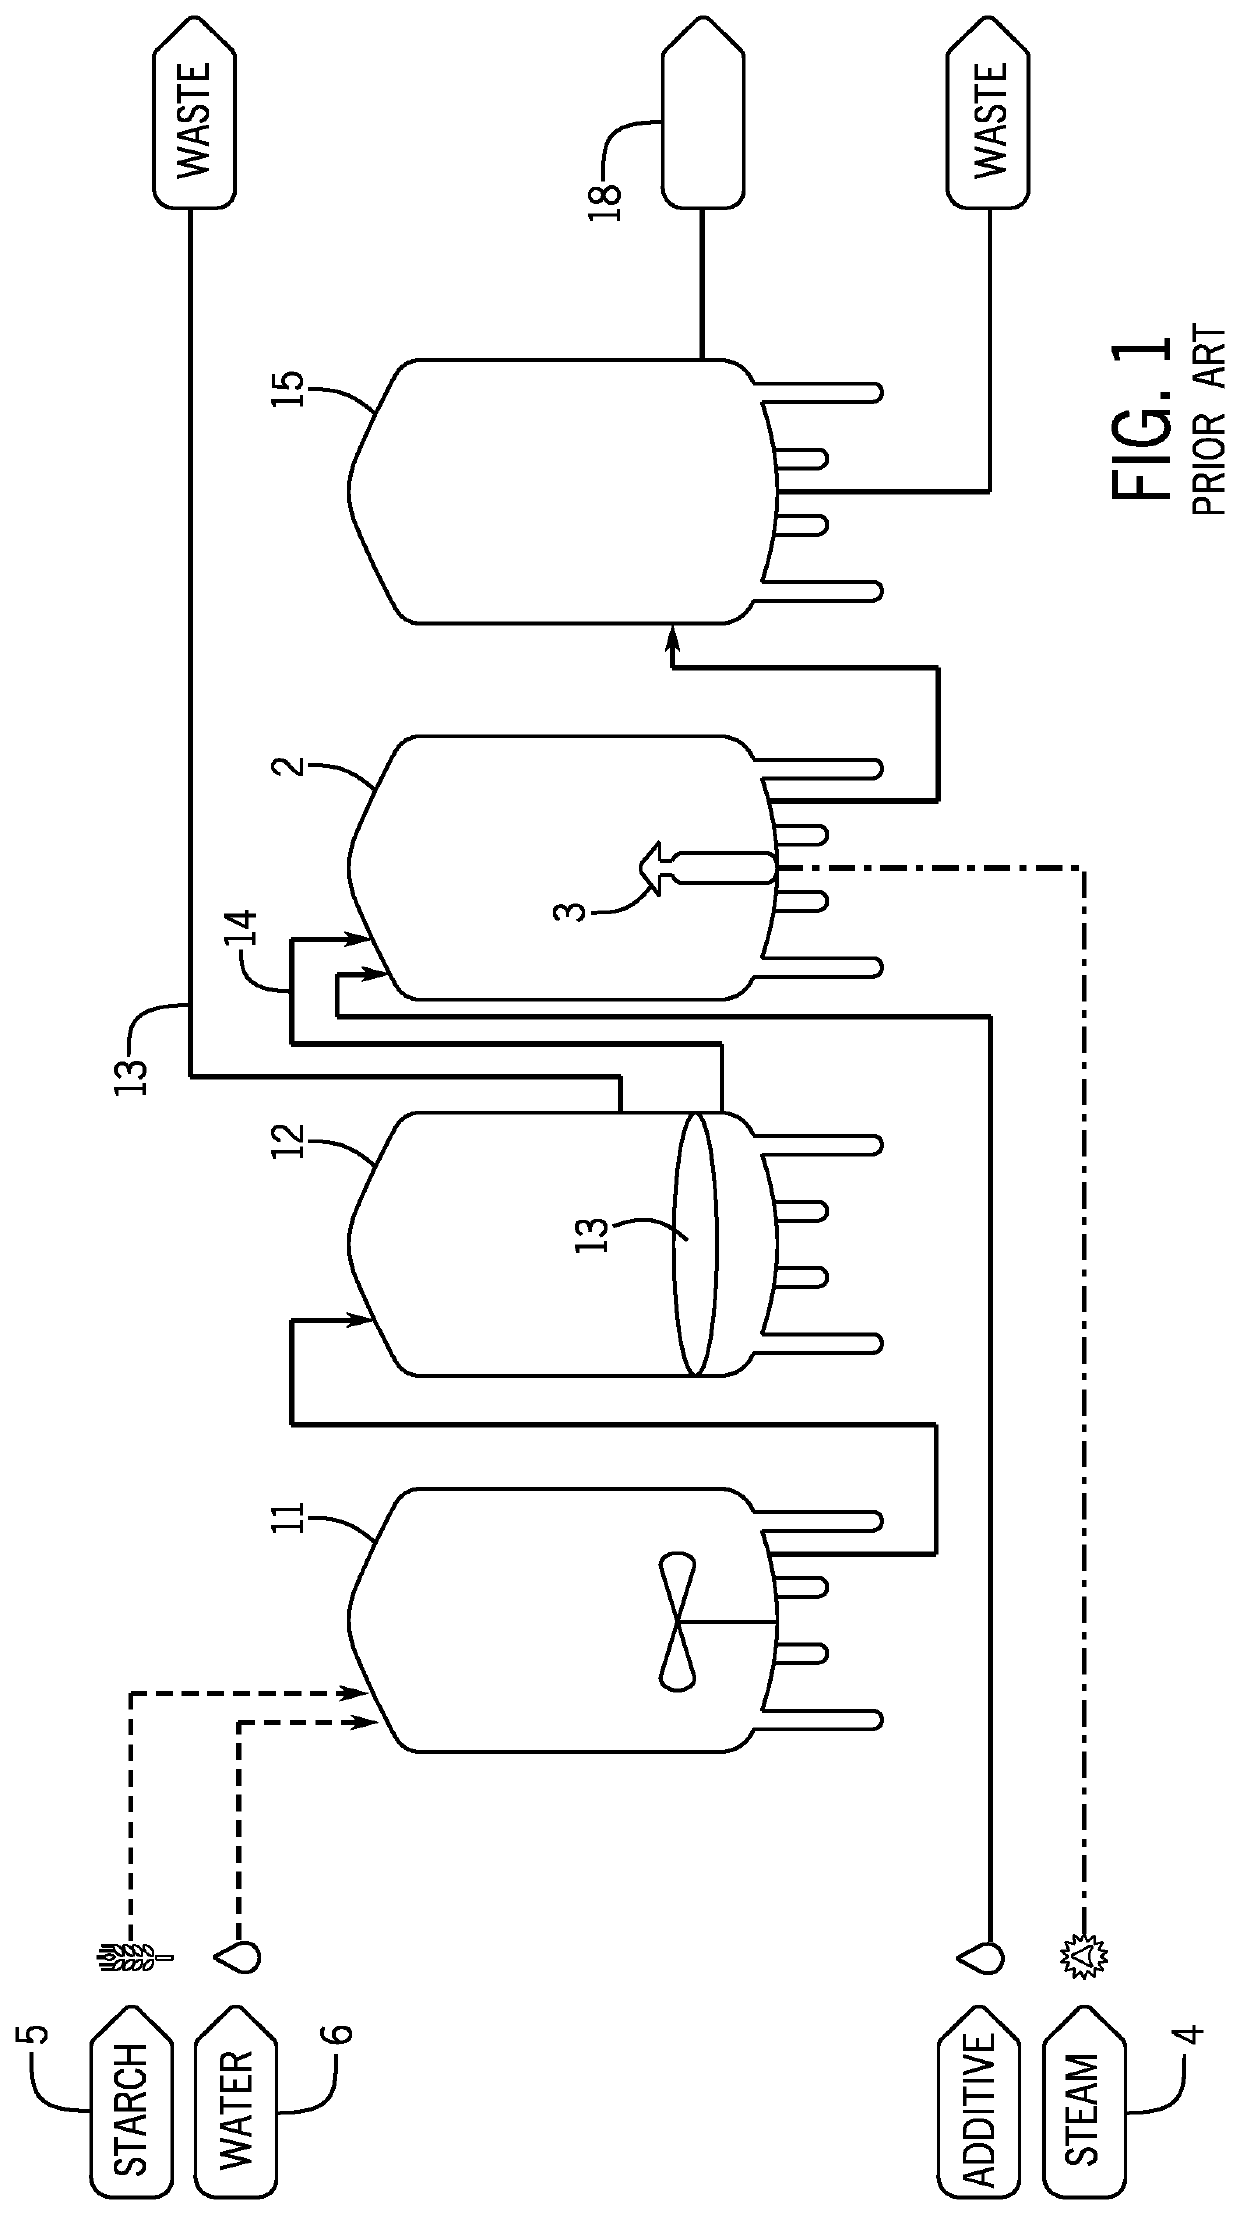 System for wort generation